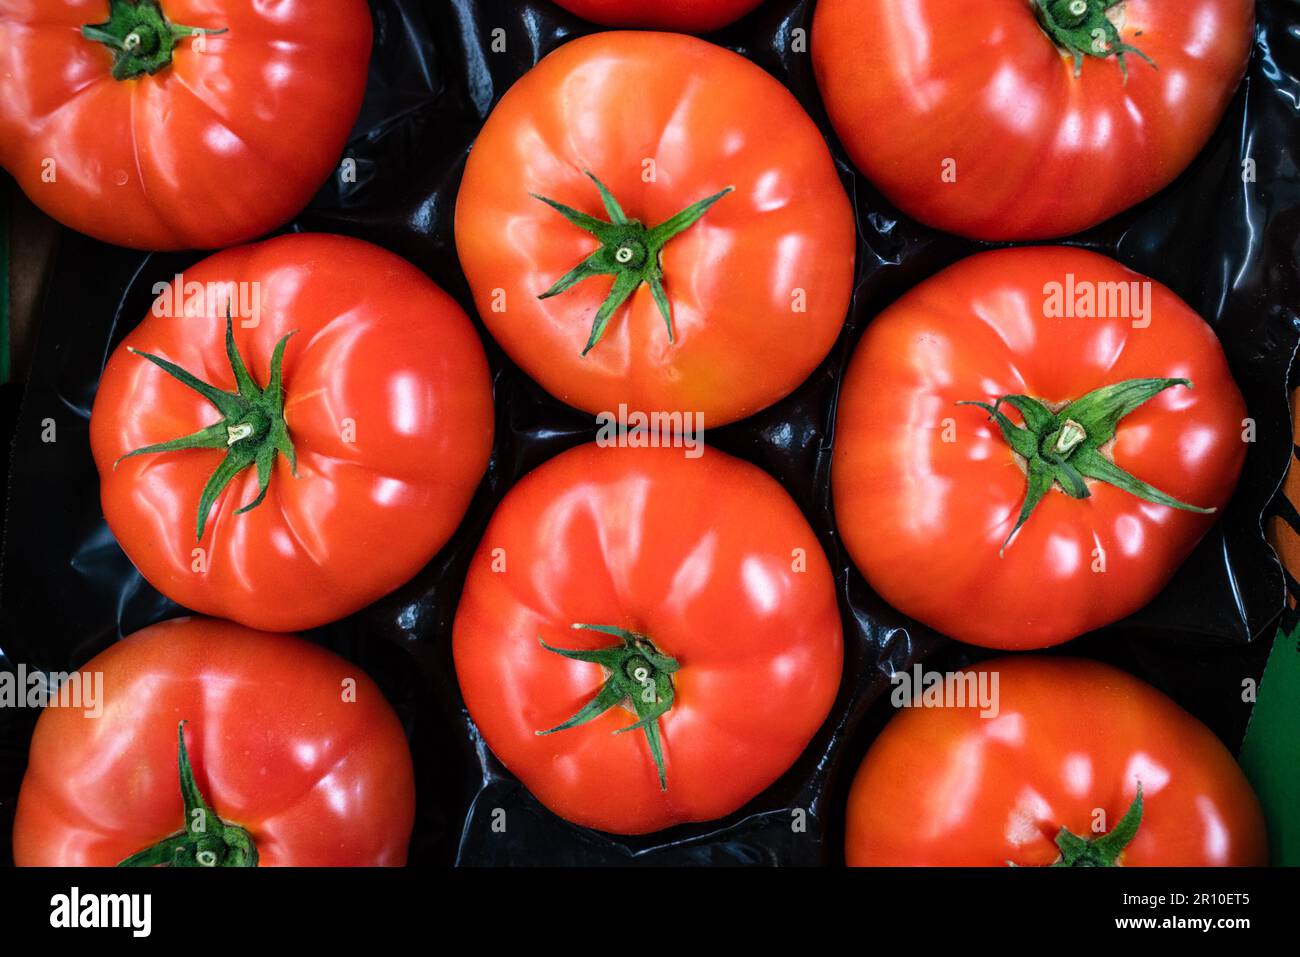 group of ripe red tomatoes in grocery produce Stock Photo